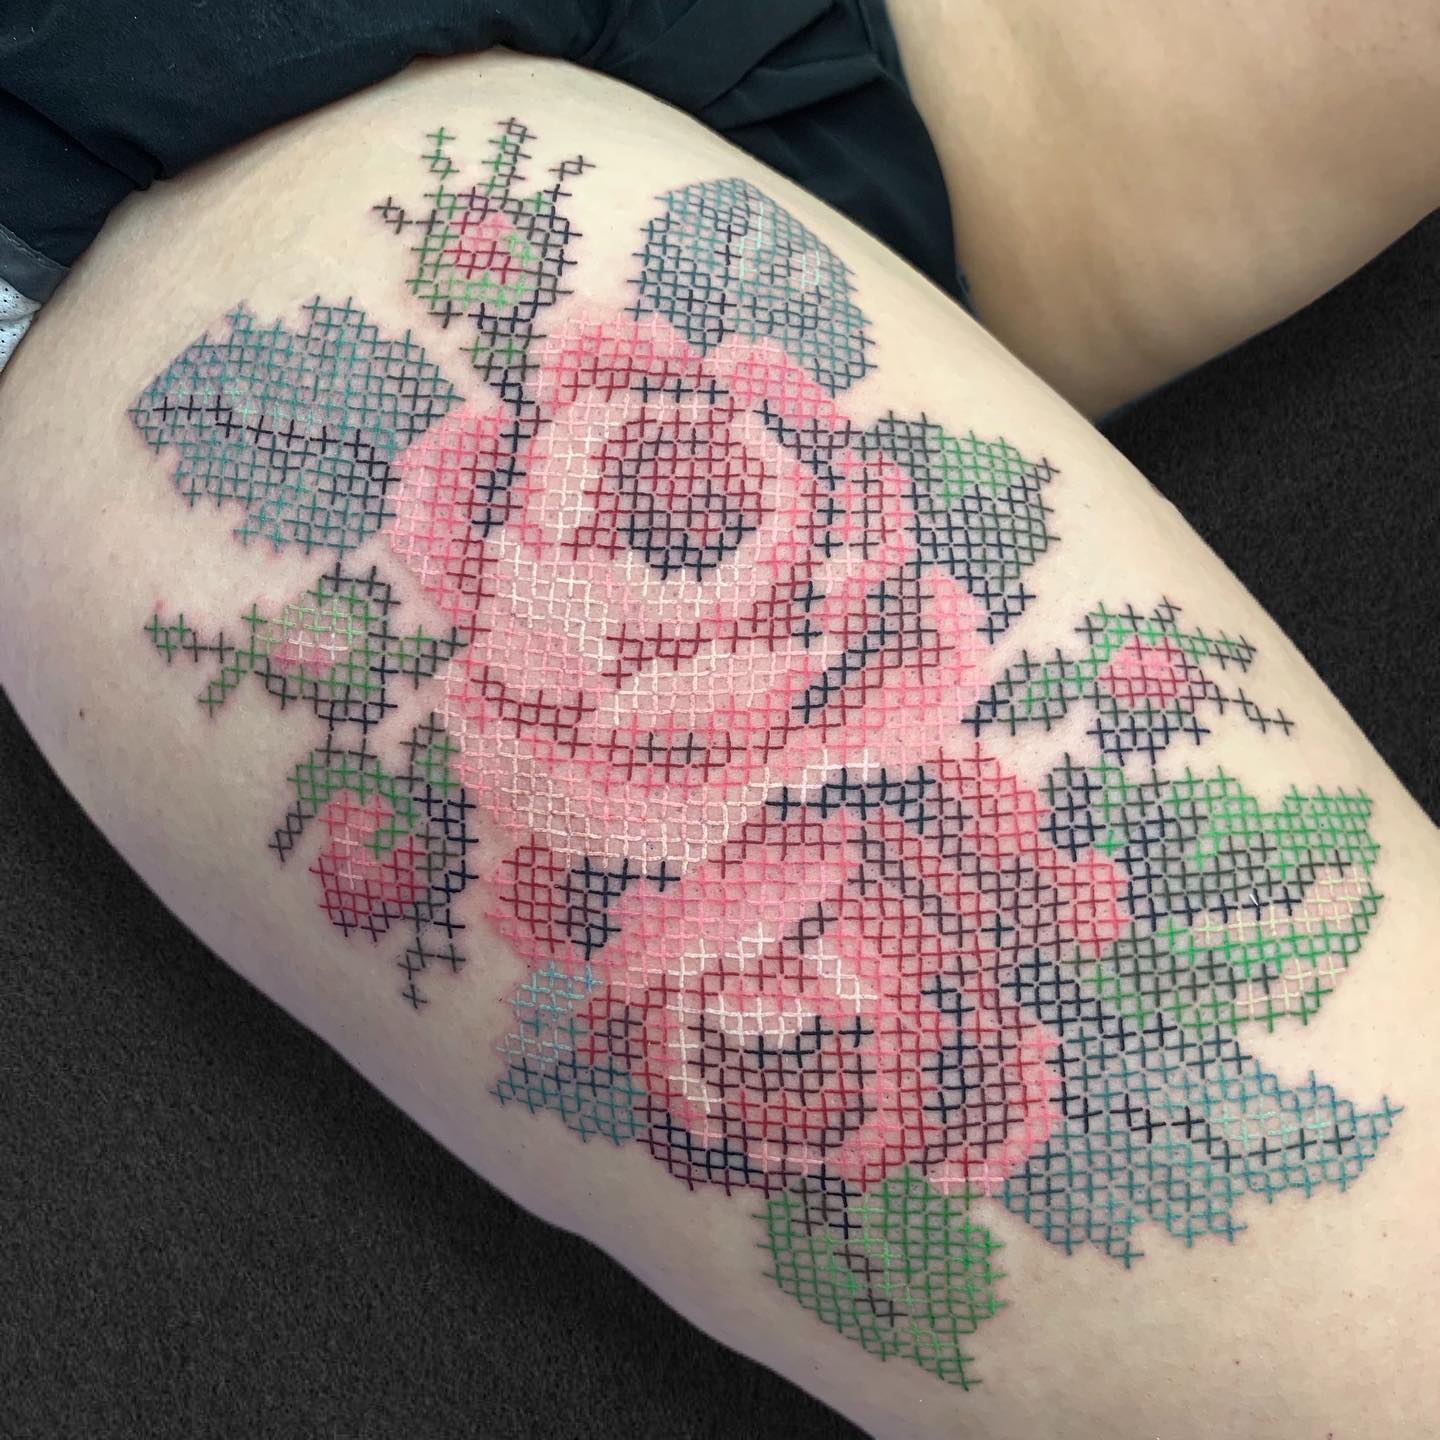 Bunch of roses embroidery tattoo on thigh 